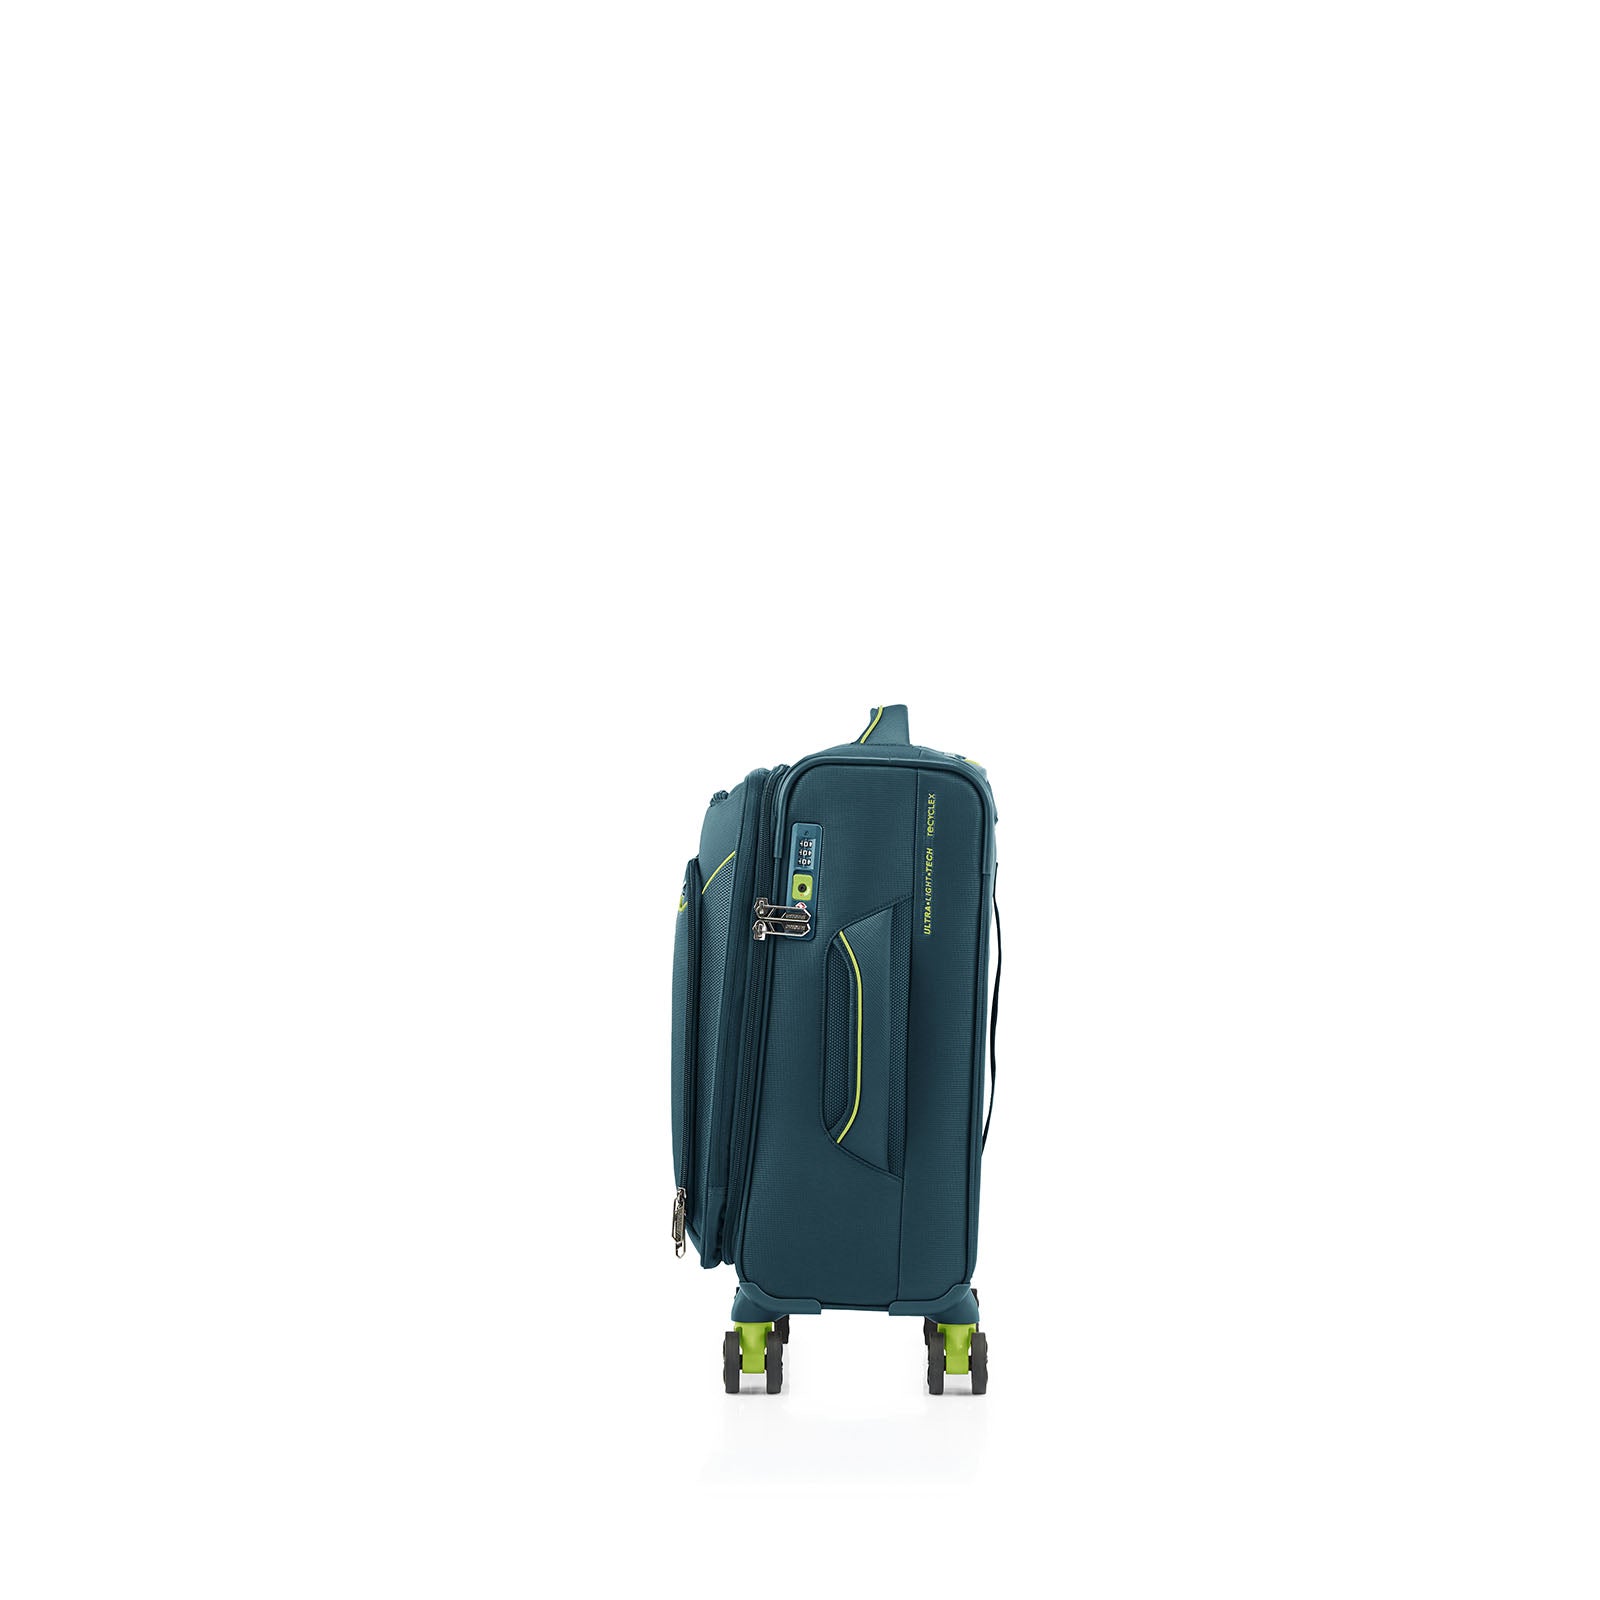 American-Tourister-Applite-4-Eco-55cm-Carry-On-Suitcase-Varsity-Green-Side